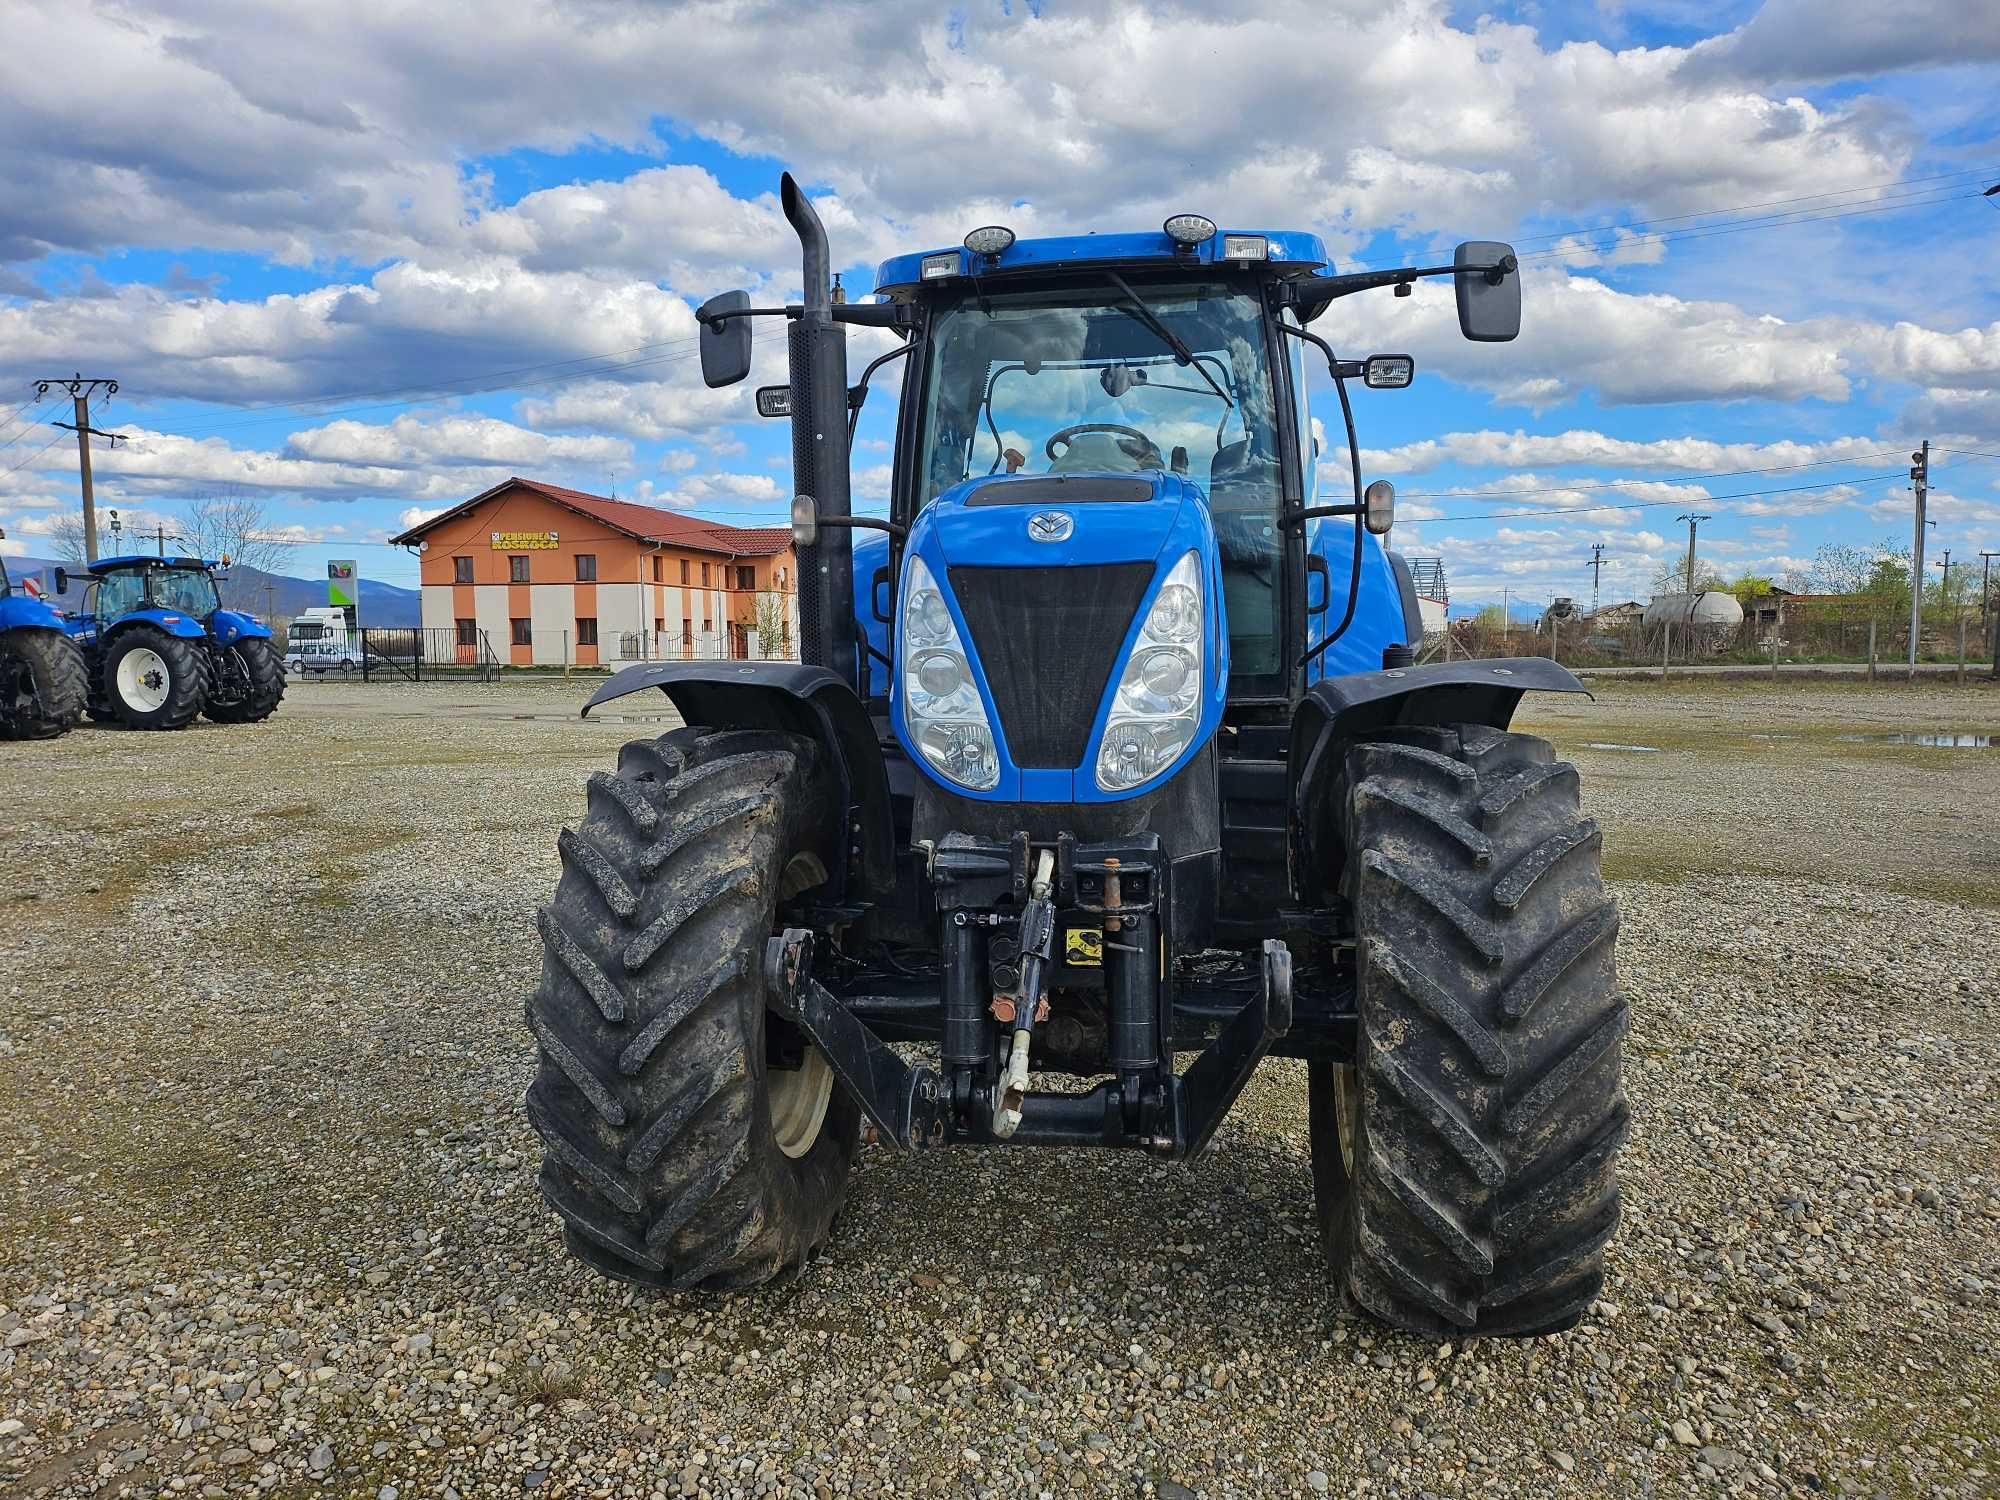 Tractor New Holland T7030